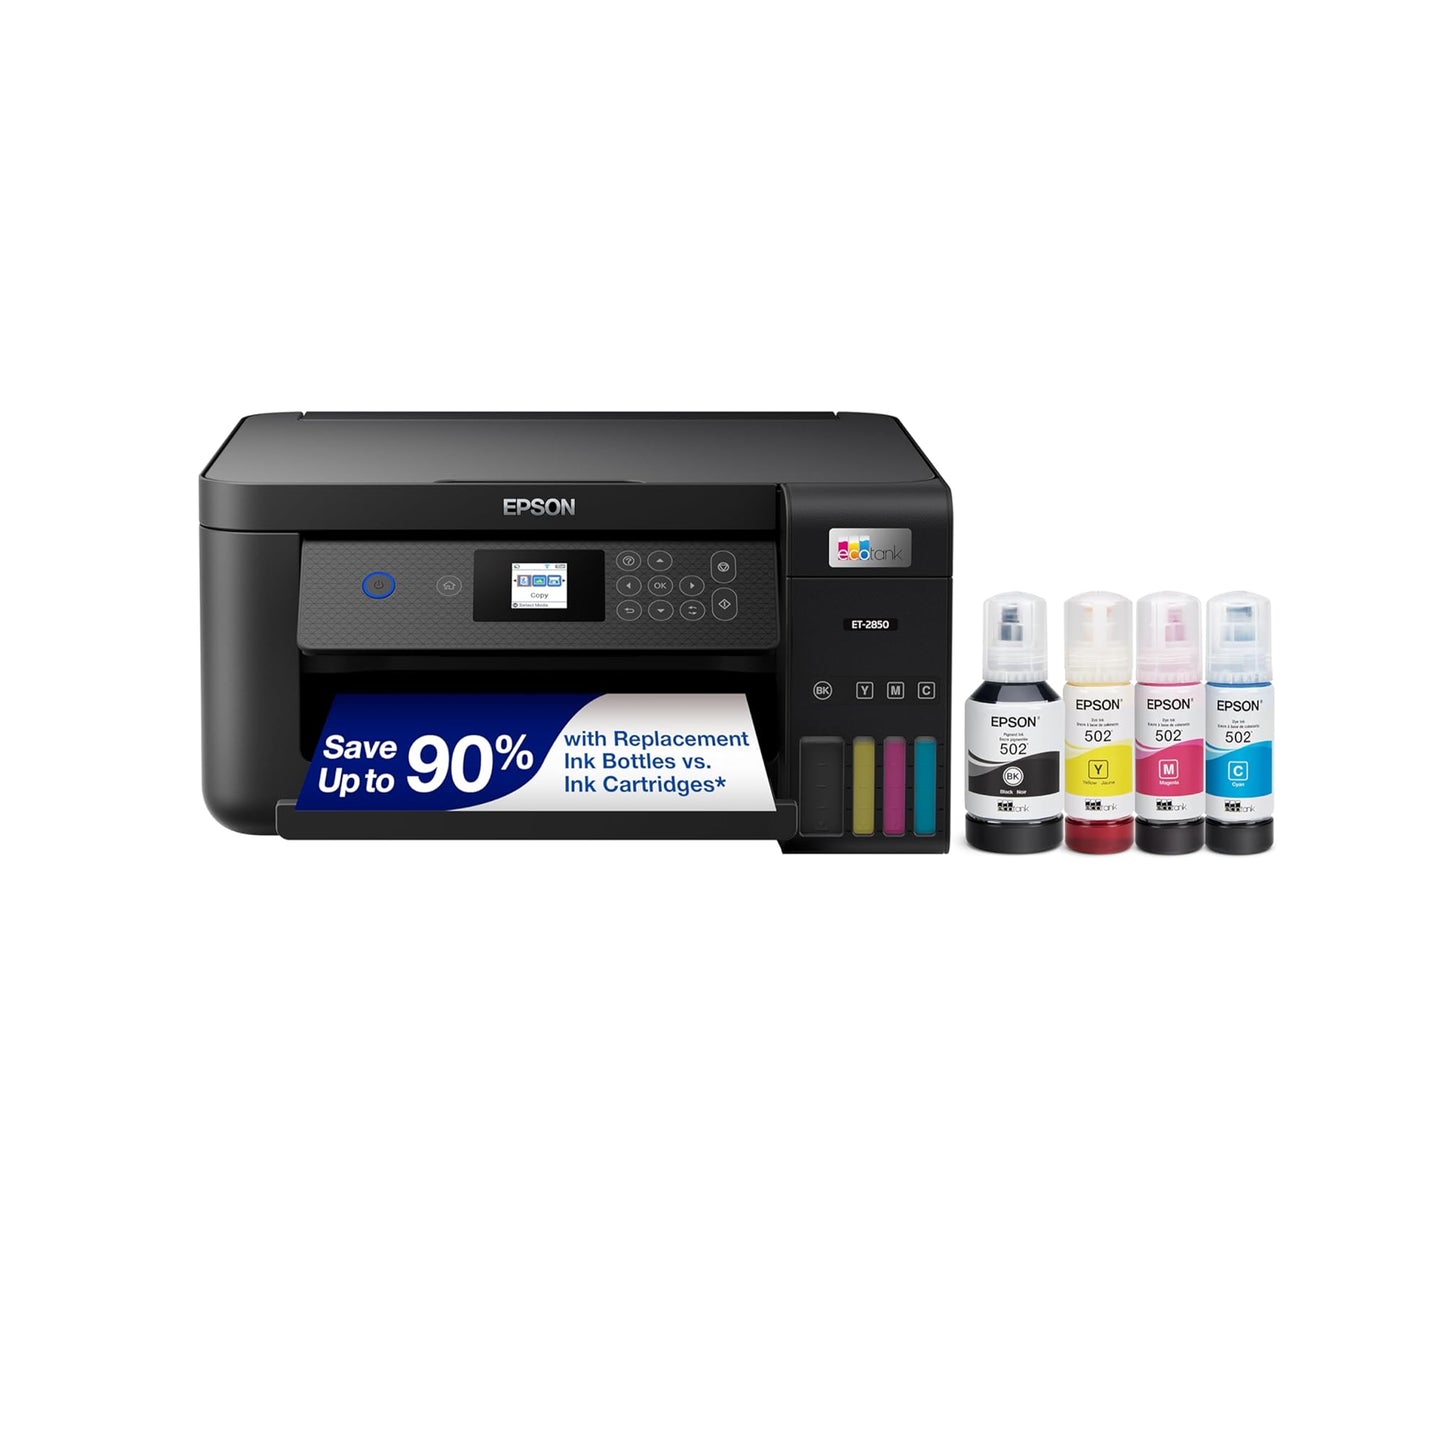 Epson EcoTank ET-2850 Wireless Color All-in-One Cartridge-Free Supertank Printer with Scan, Copy and Auto 2-Sided Printing. Full 1-Year Limited Warranty - Black (Renewed Premium)